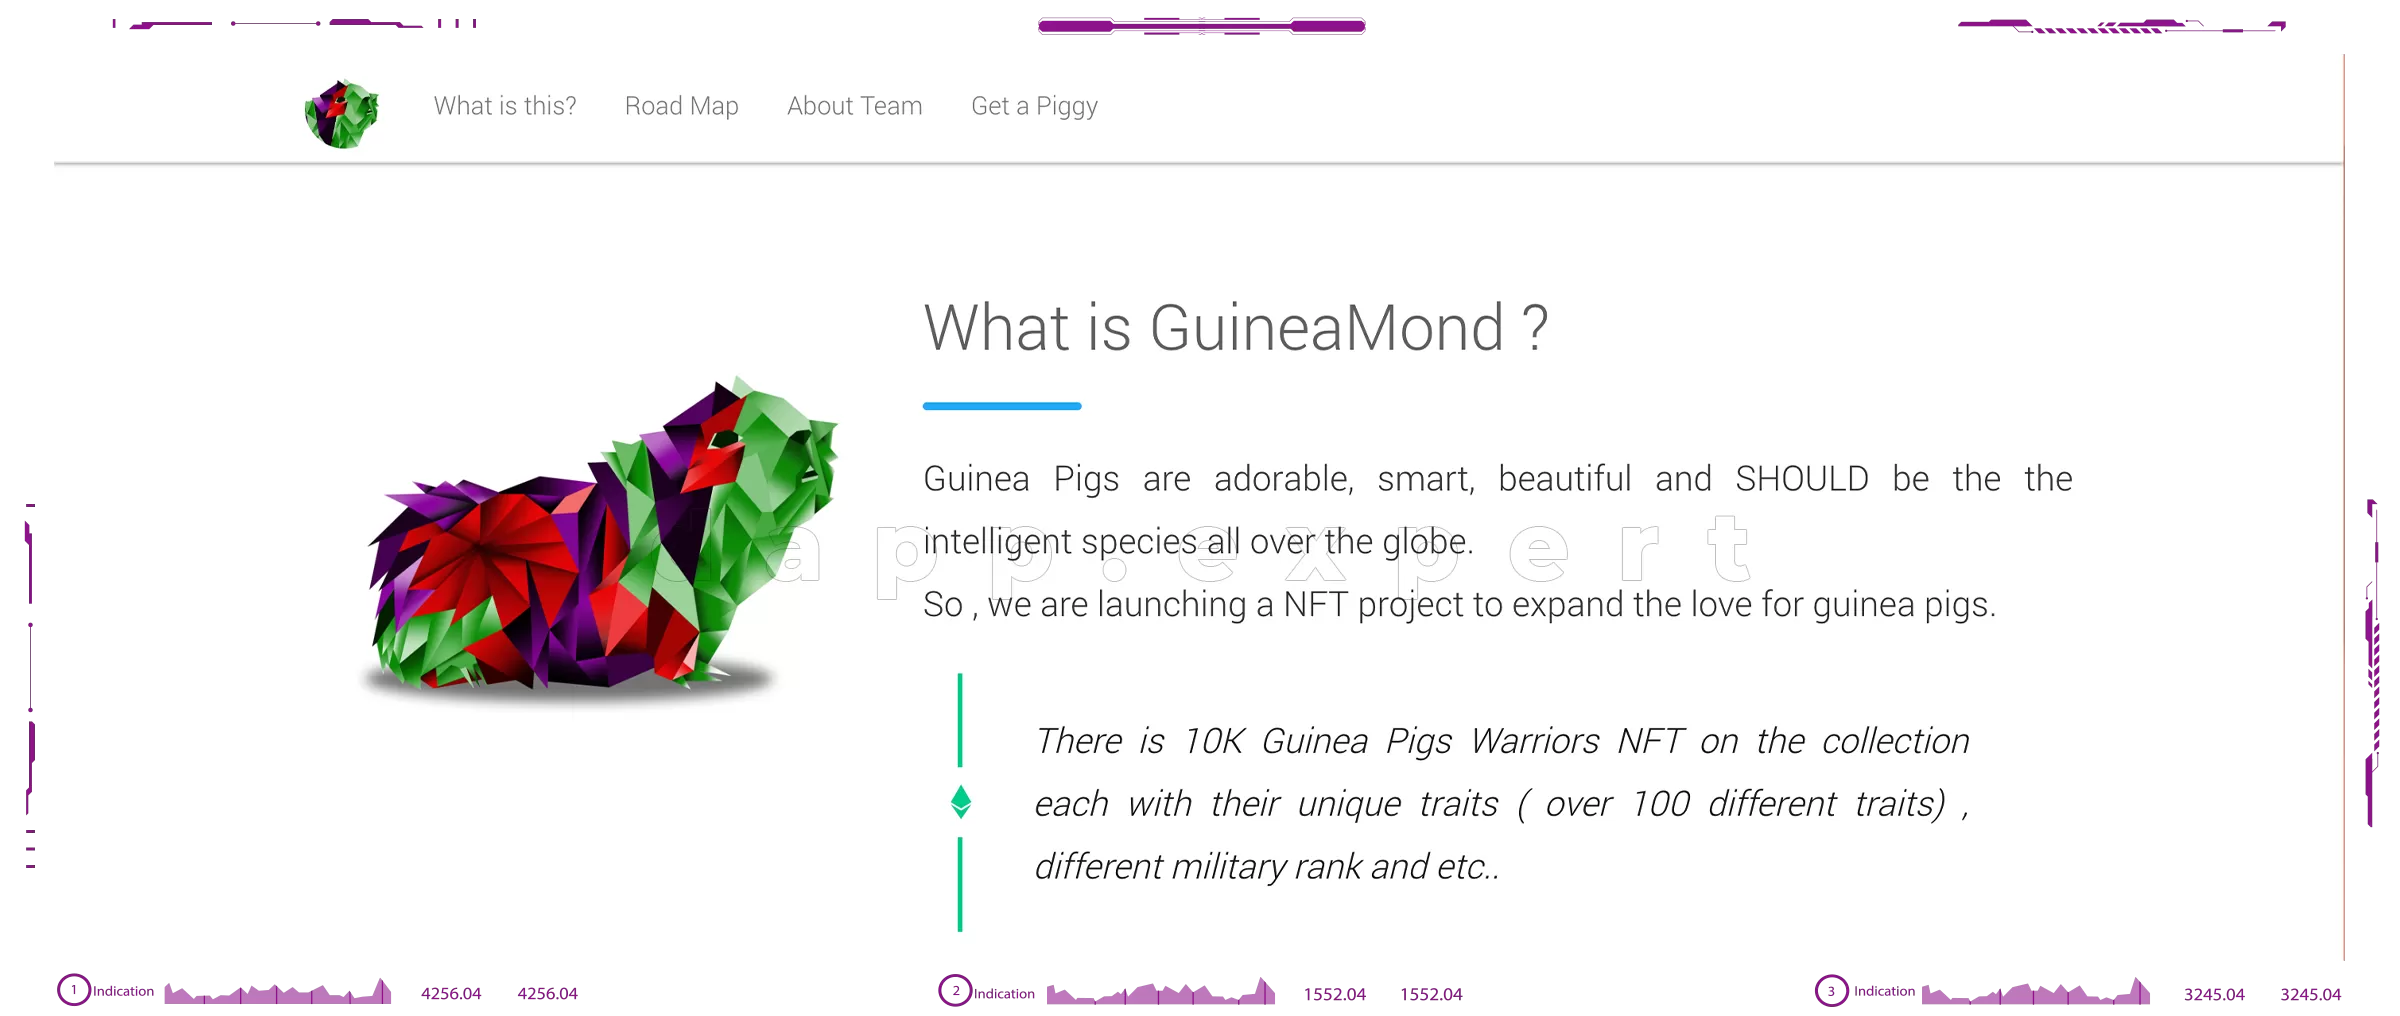 Guineamond NFT Collection dapps